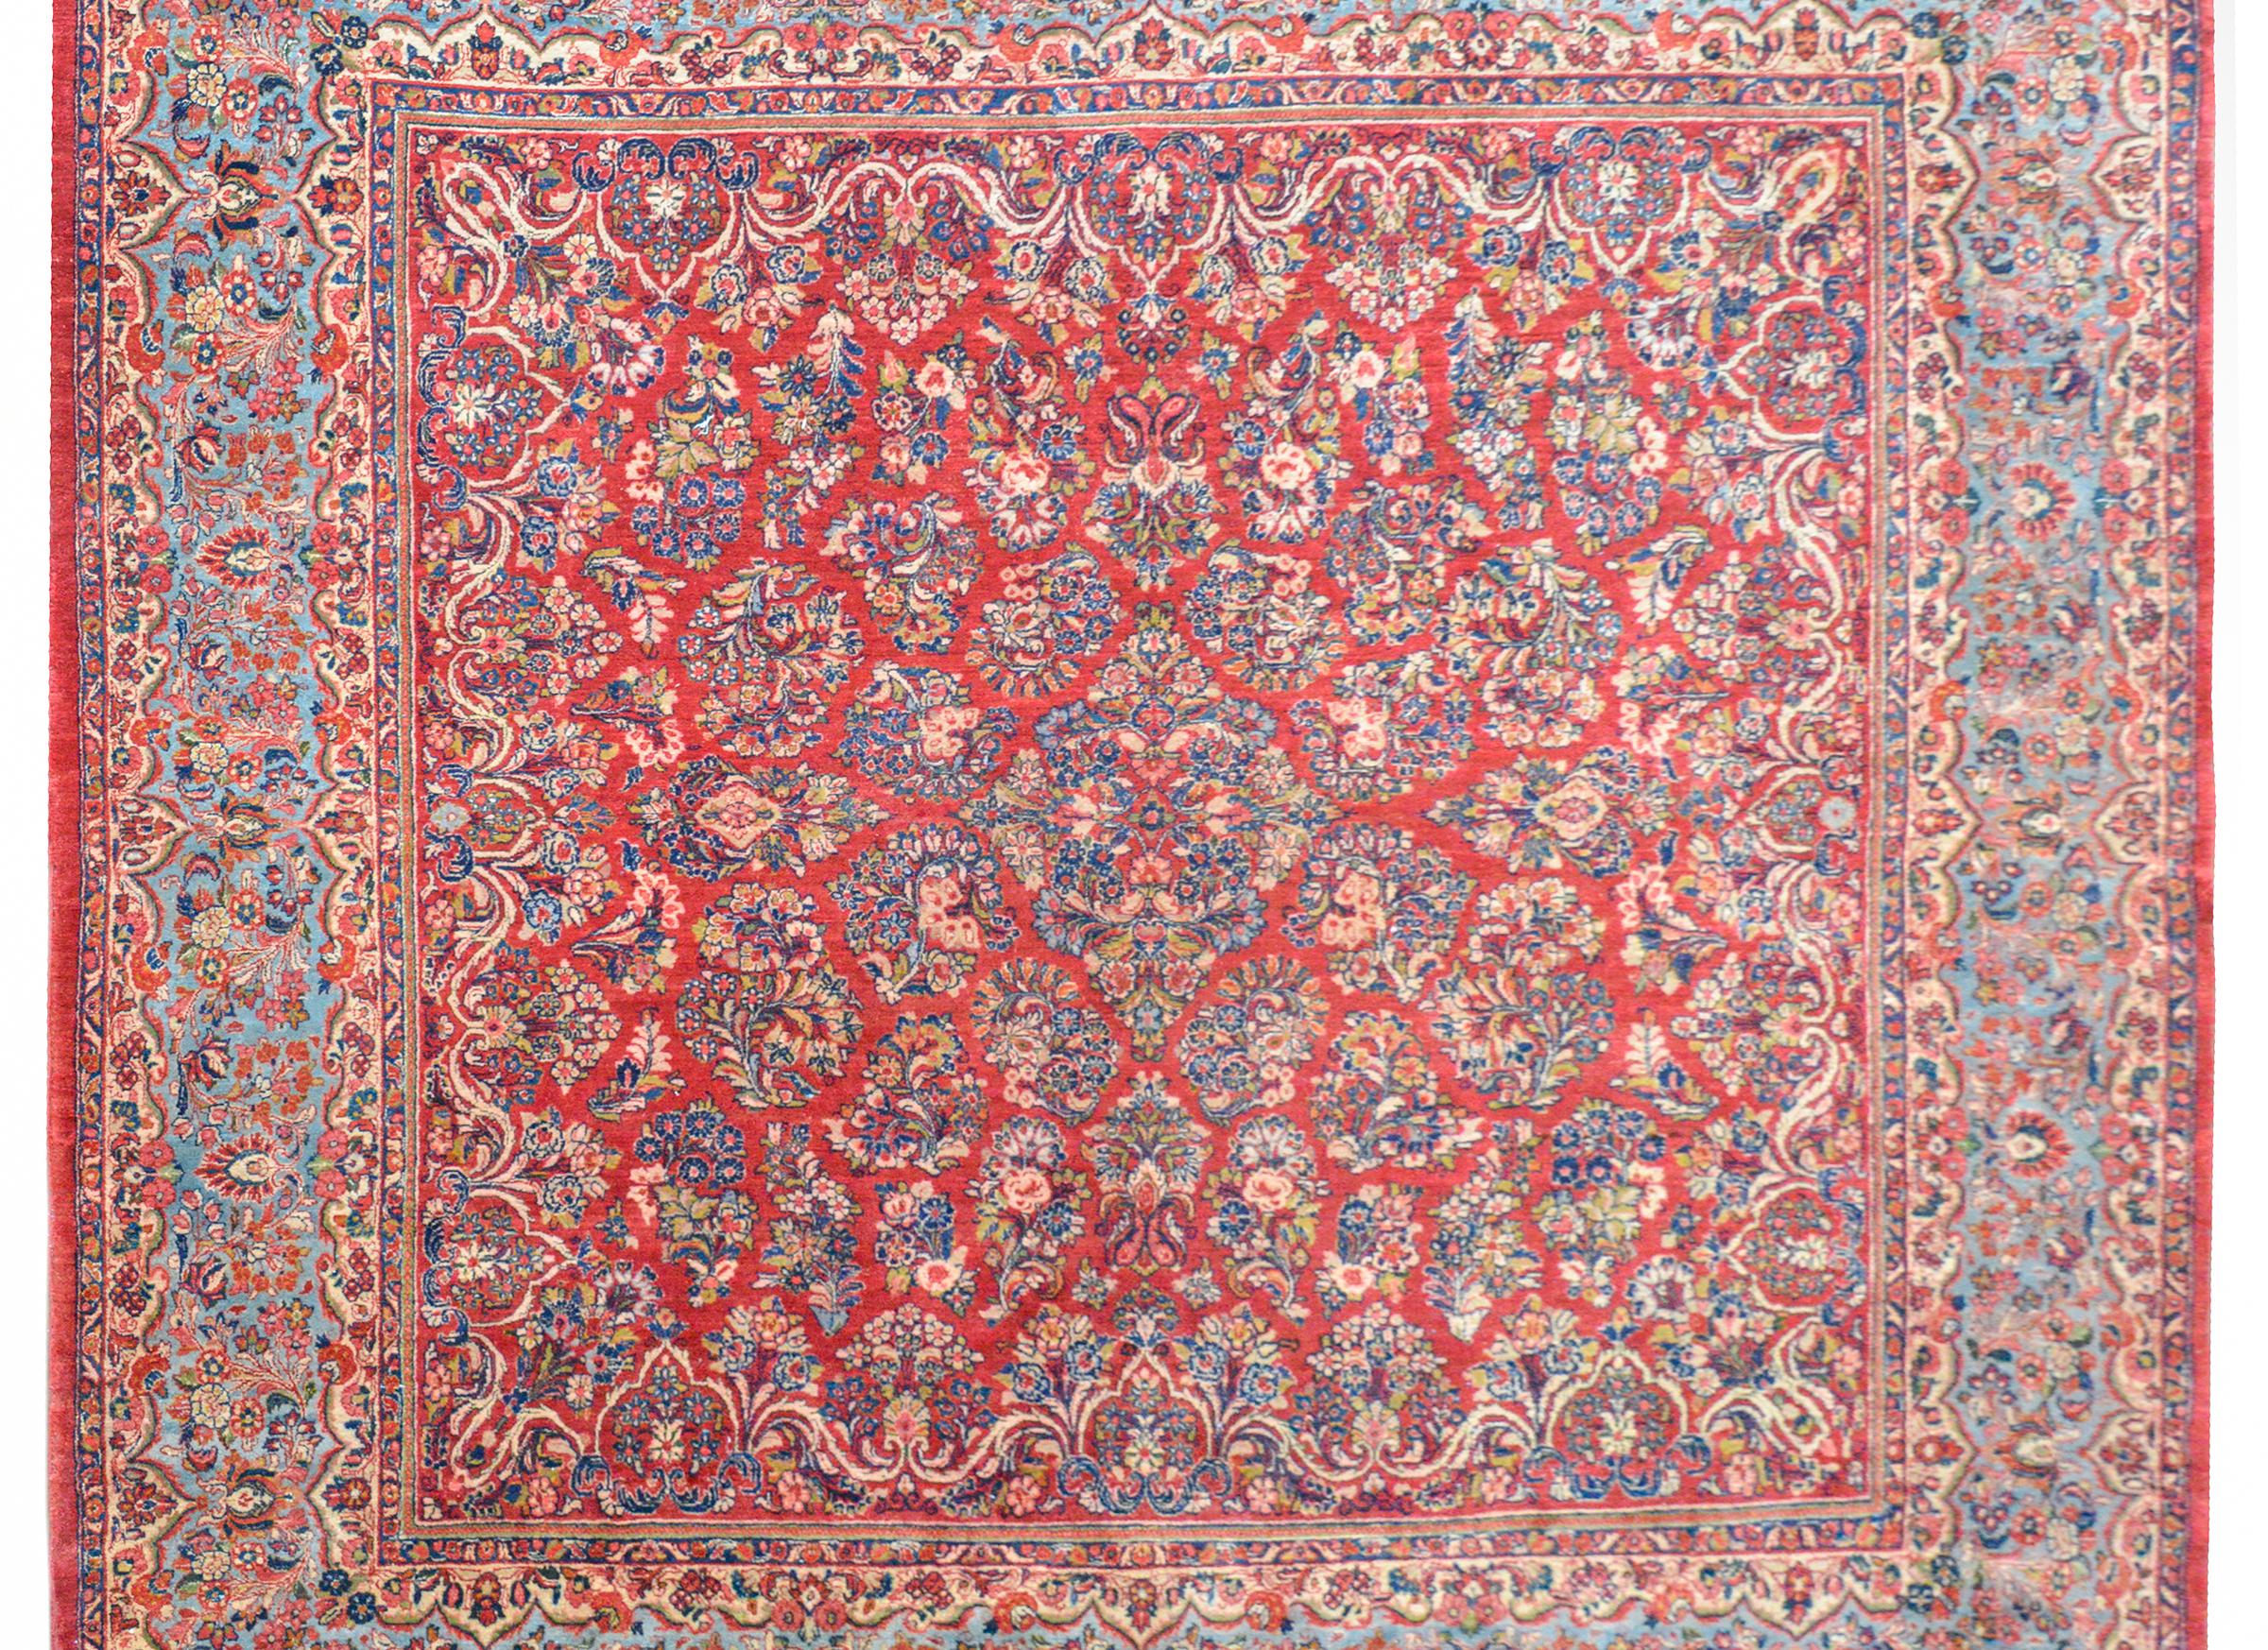 A rare early 20th century square Persian Sarouk rug with a traditional pattern containing myriad clusters of flowers woven in light and dark indigo, cream, pink, and green, set against a crimson background. The border is extra wide, with a central